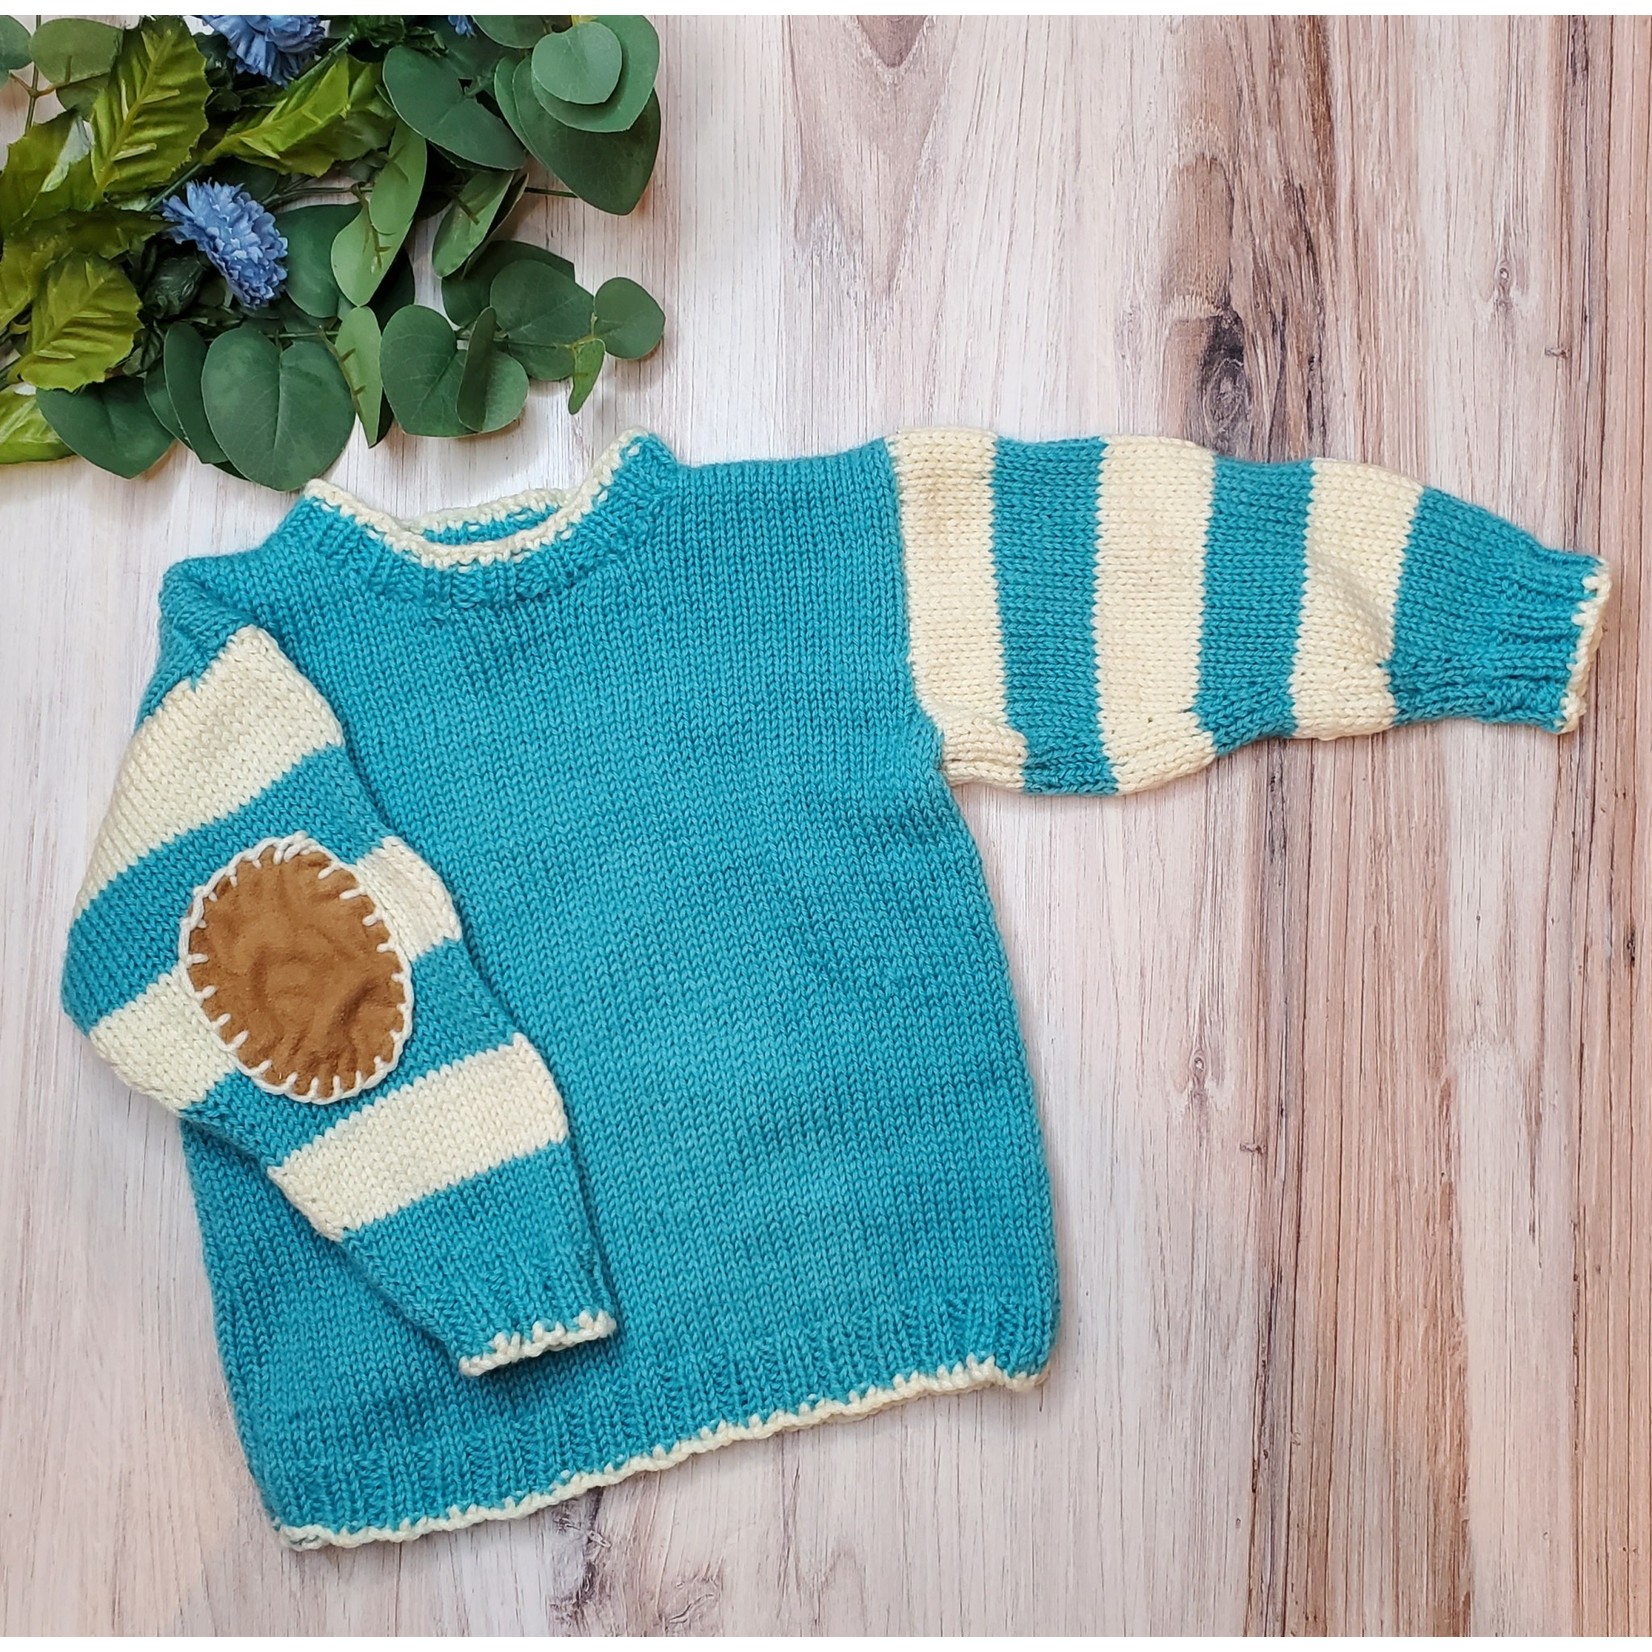 Roan's Repertoire Toddler Sweater - Blue with Elbow Patches - Knitted - Size 1-3 yrs.